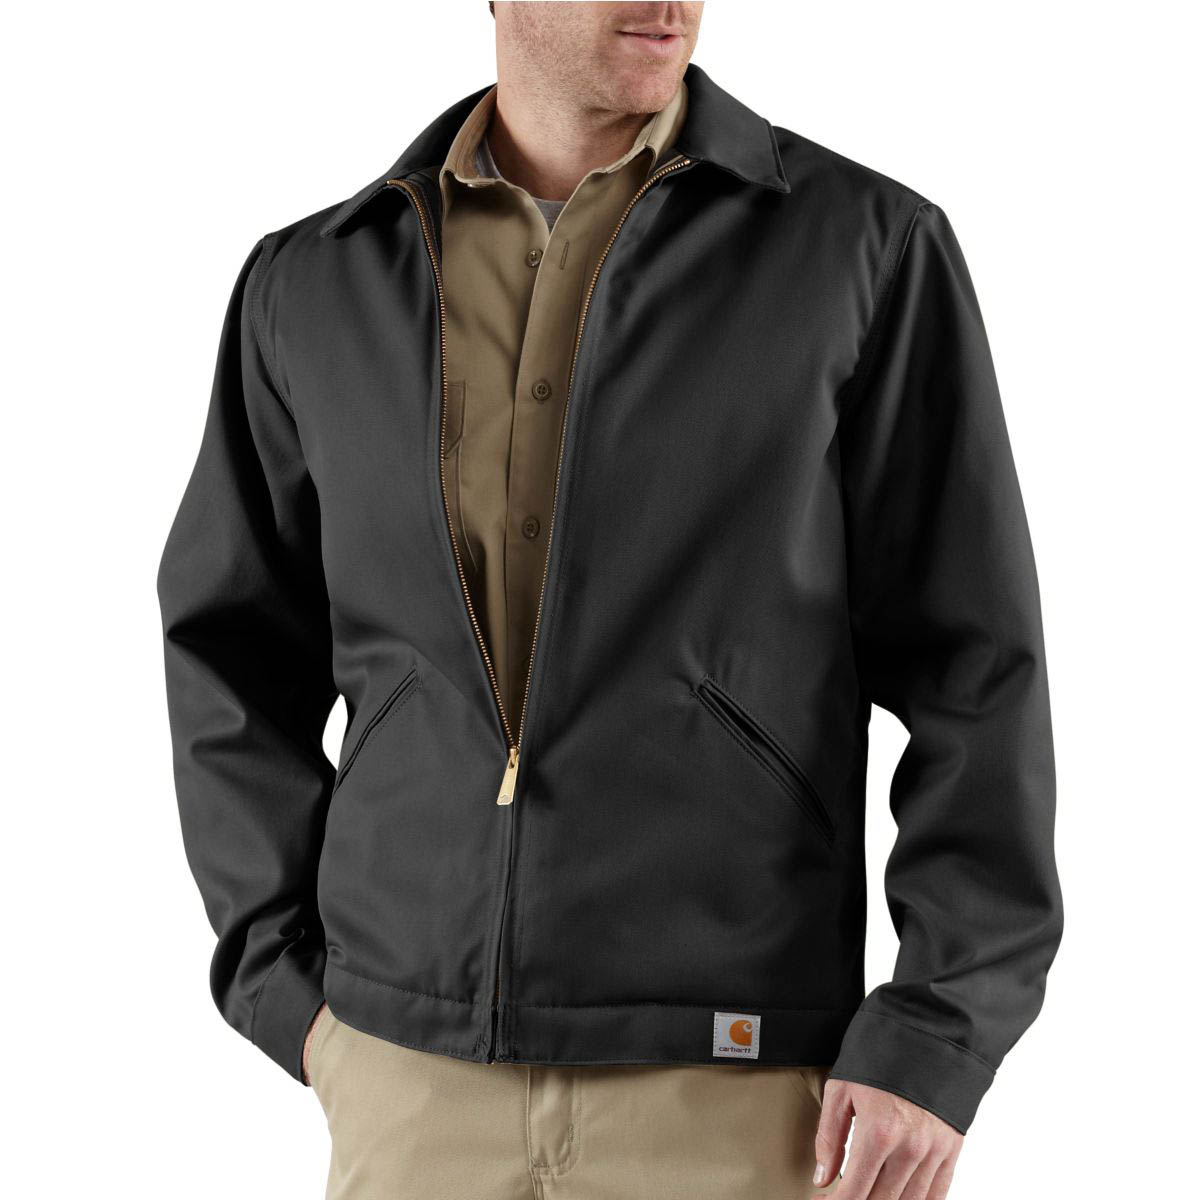 Carhartt Men's Blended Twill Work Jacket Midweight Quilt Lined